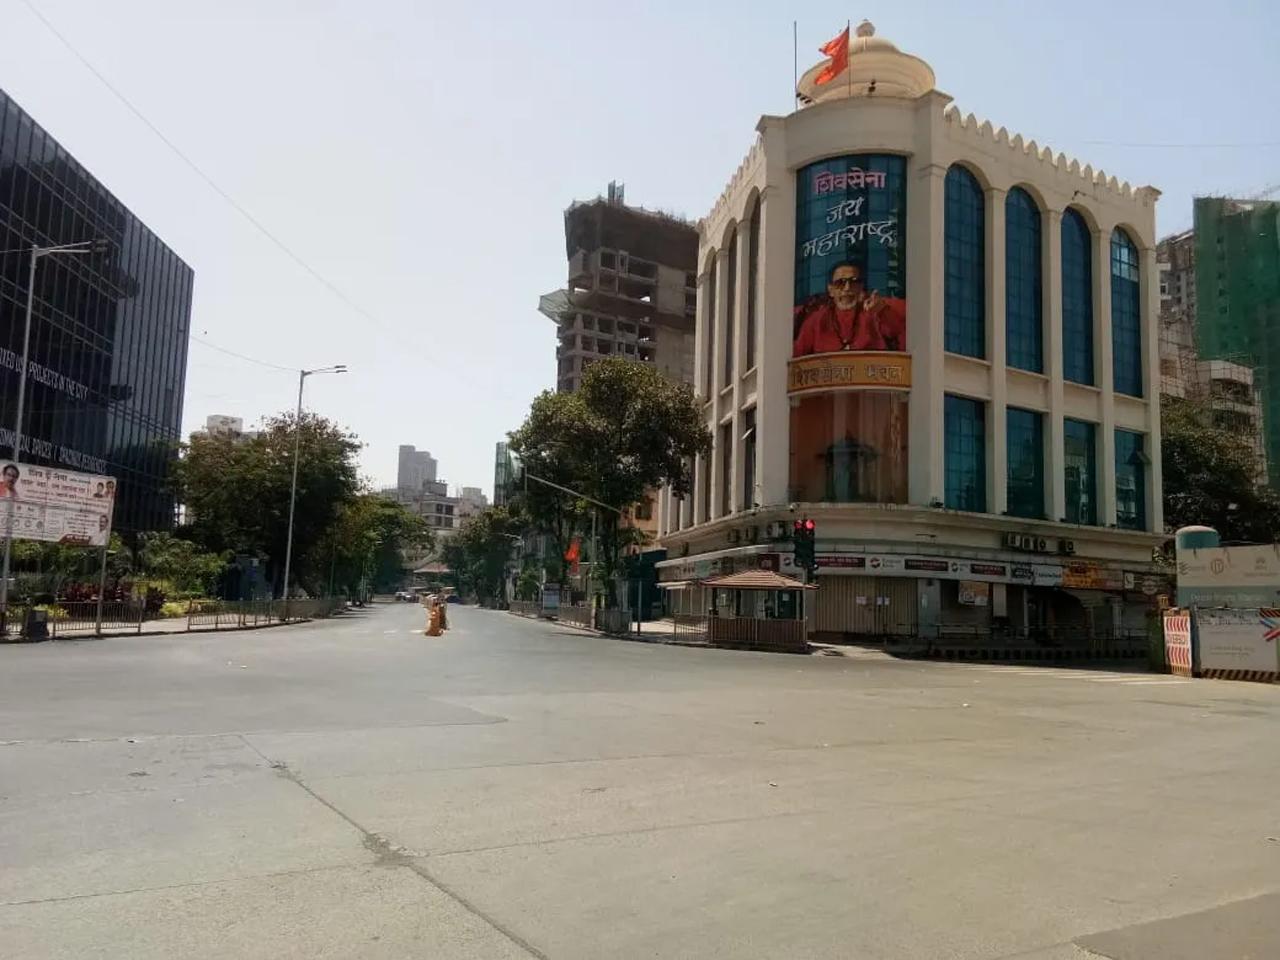 The road opposite Sena Bhavan - the Shiv Sena headquarters in Dadar wears a deserted look after Prime Minister Narendra Modi announced 'Janata Curfew' on March 22, 2020 following the outbreak of the novel coronavirus.